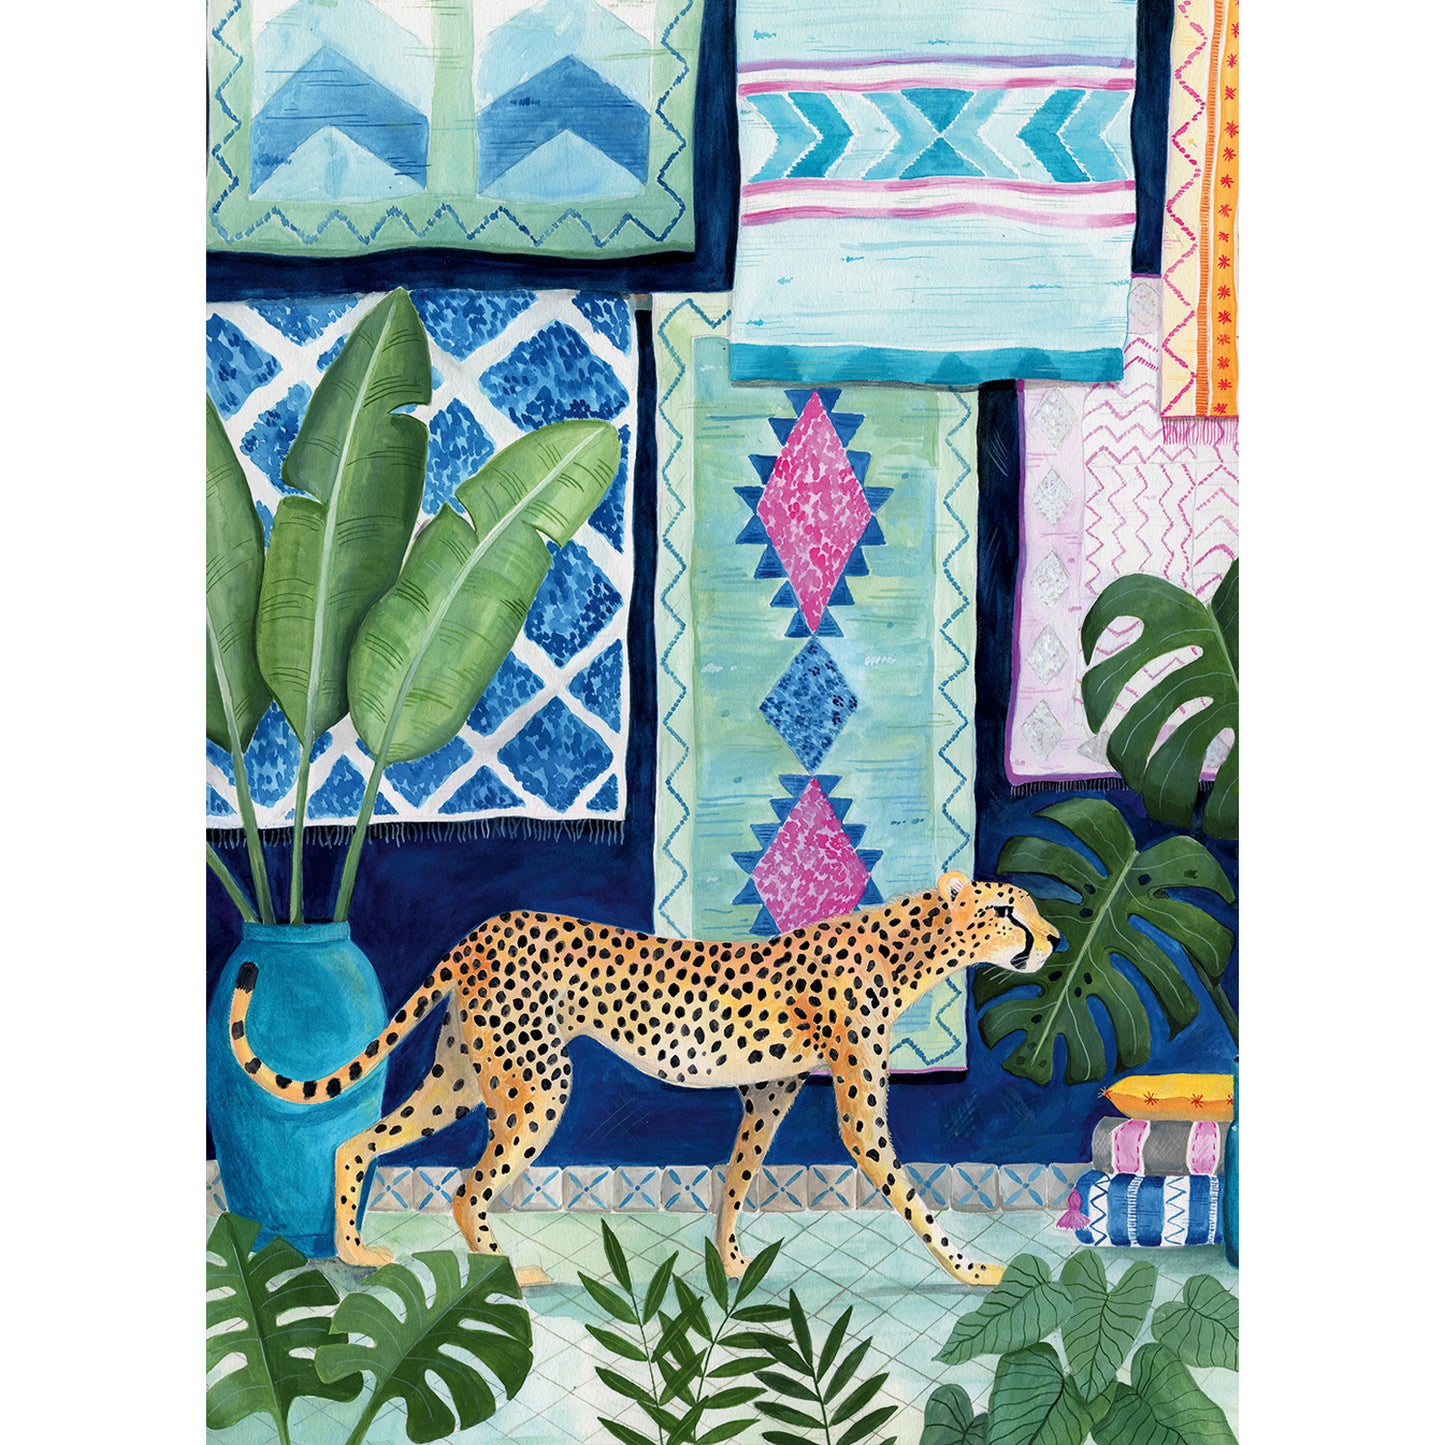 Puzzle illustratrice 1000 pièces Cheetah in Morocco